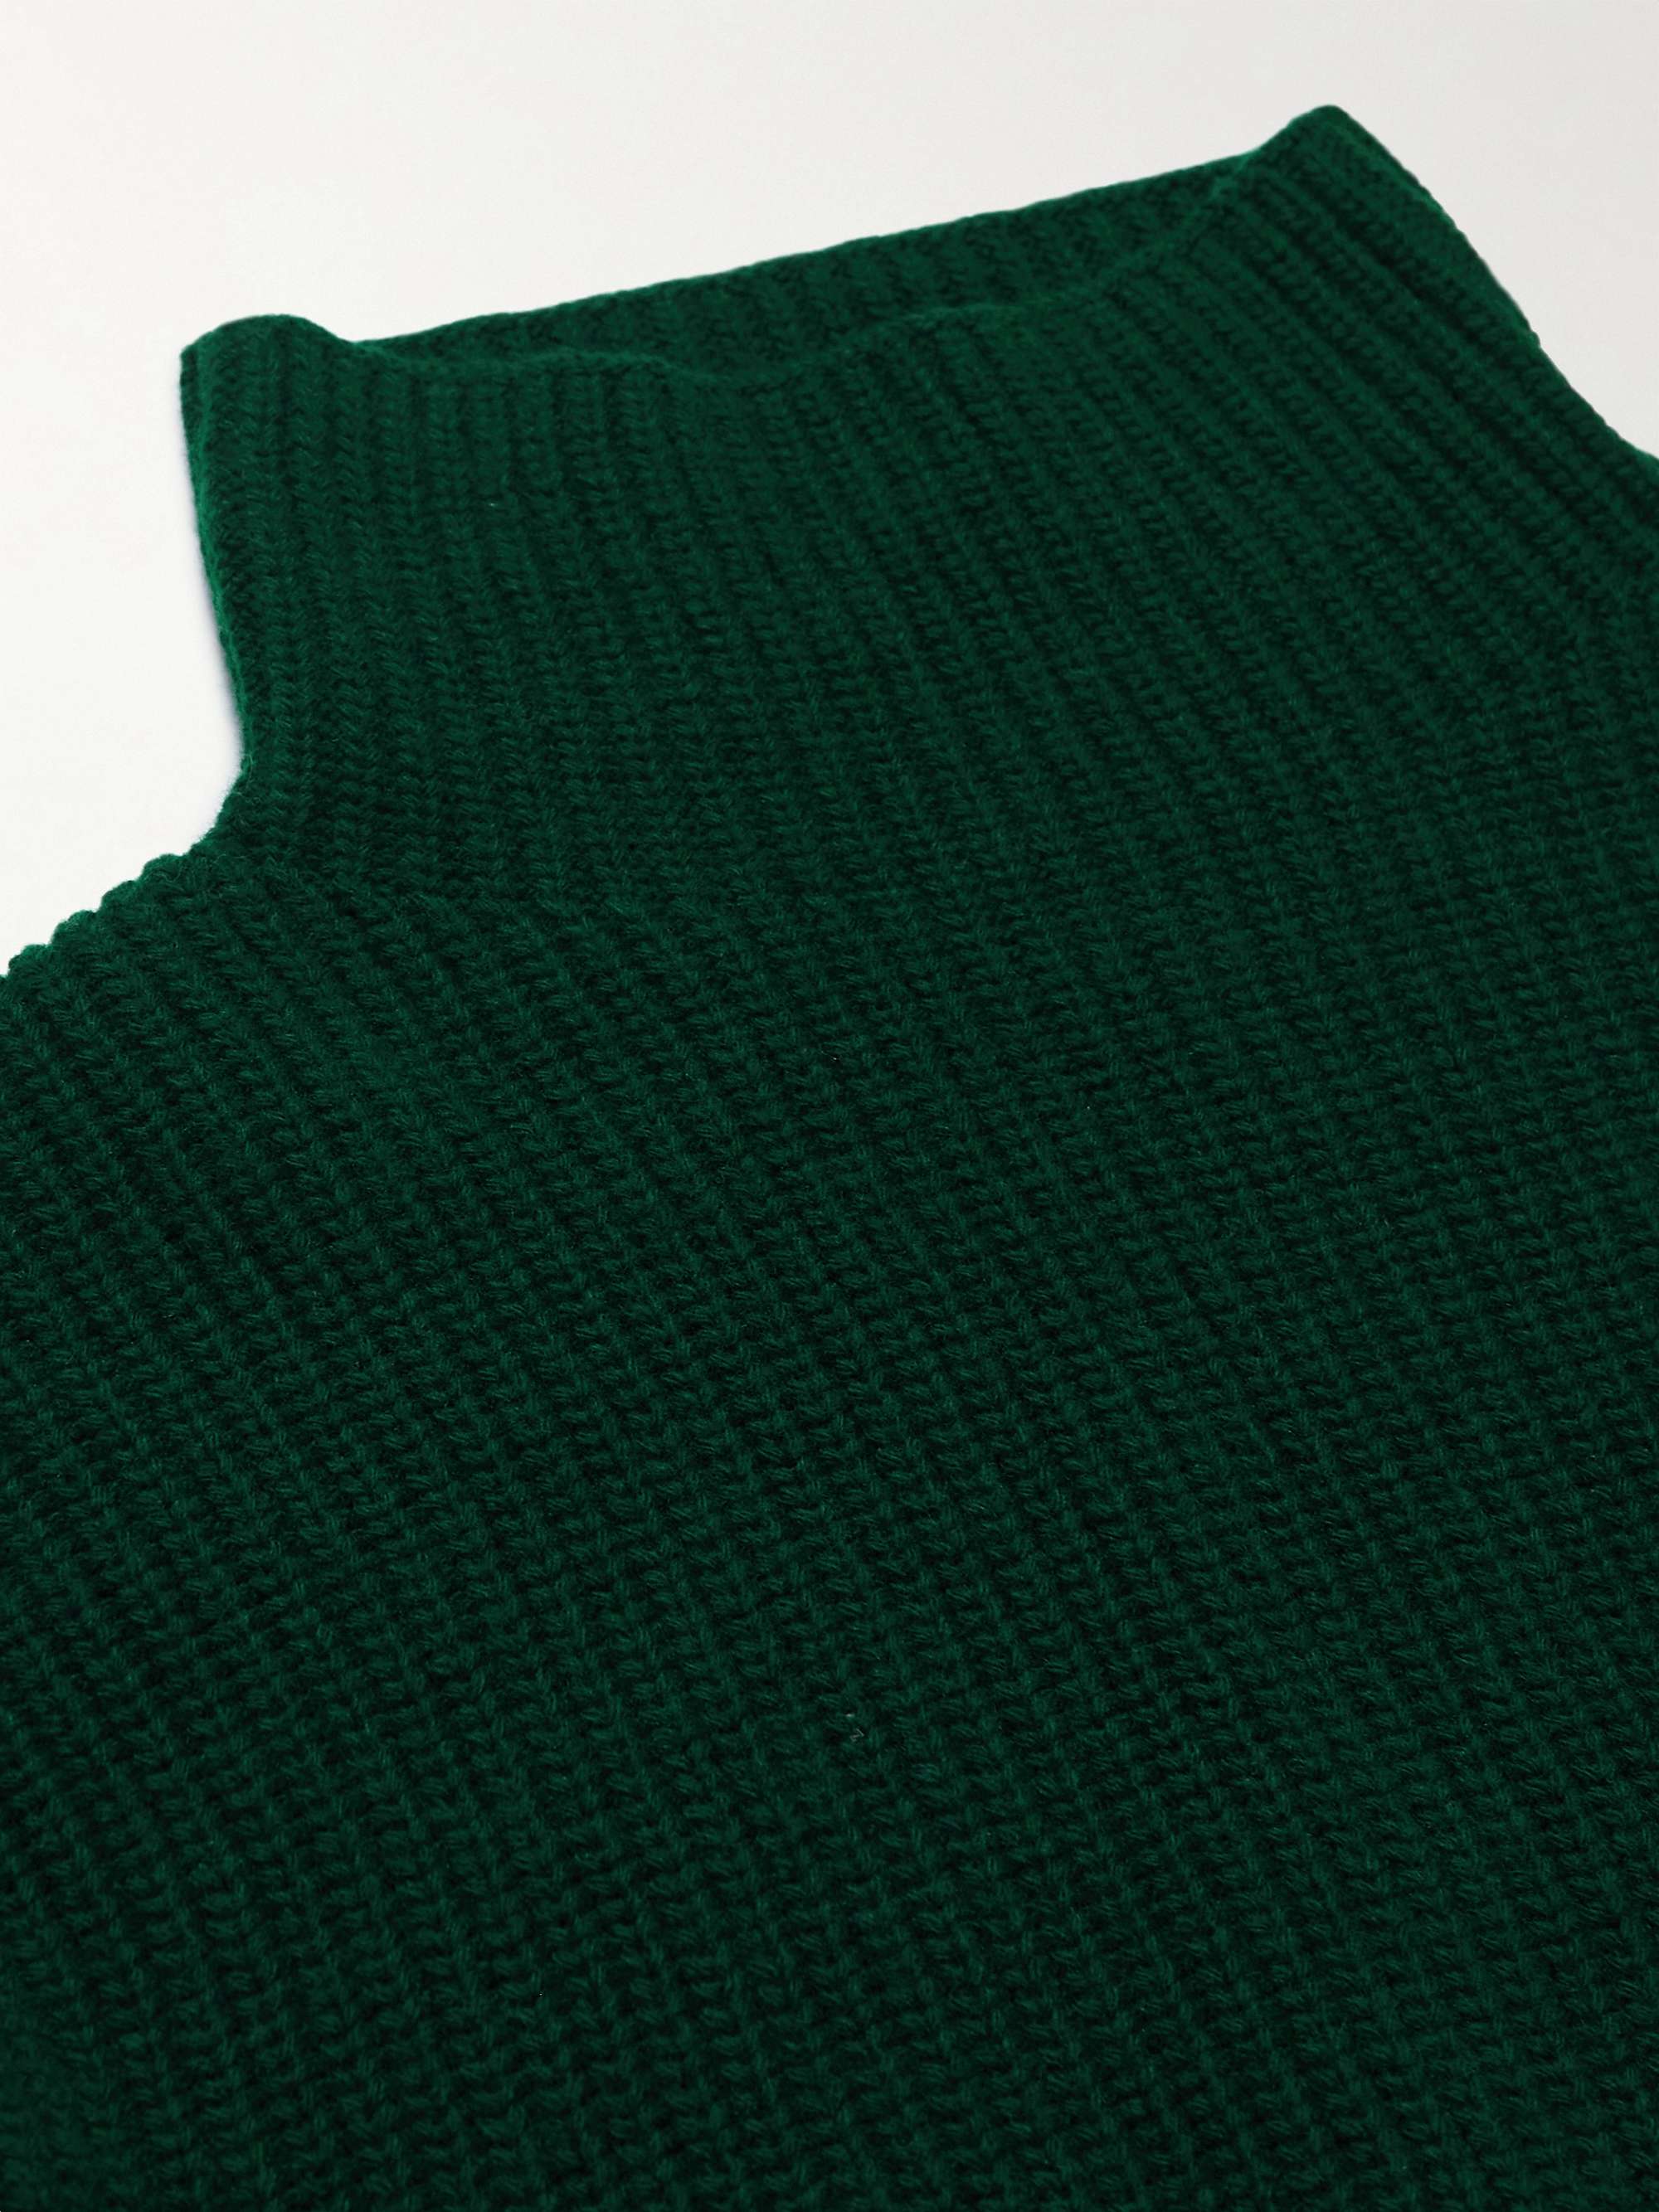 MR P. Stand-Collar Ribbed Virgin Wool Sweater